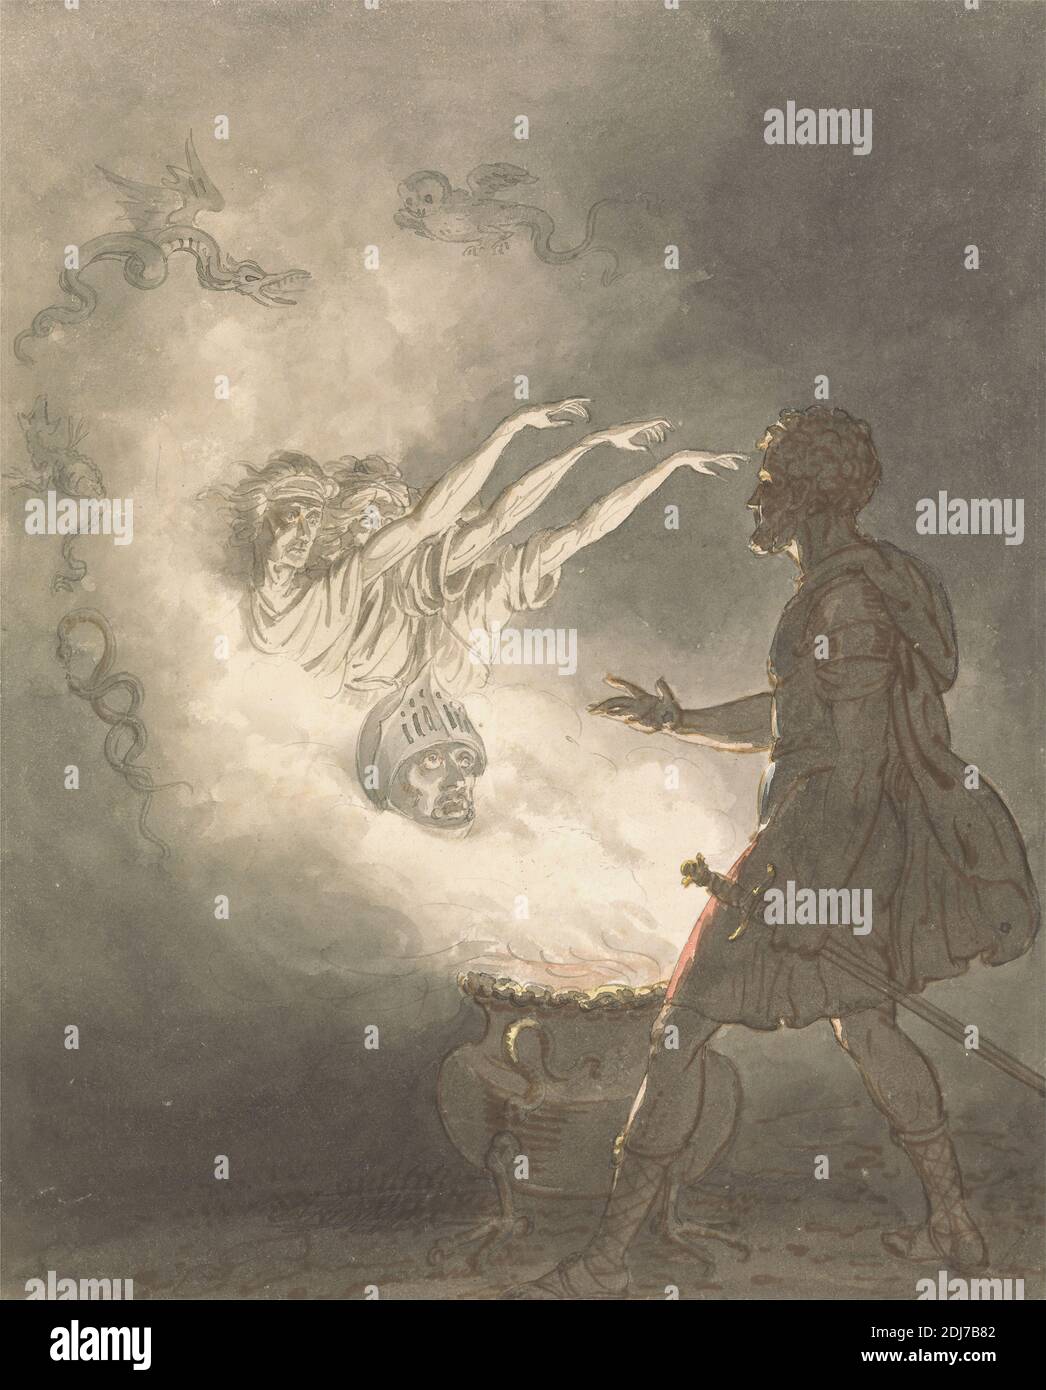 Macbeth and the Apparition of the Armed Head, William Marshall Craig, ca. 1788–1828, British, ca. 1820, Brown ink with gray wash and watercolor over graphite on moderately thick, slightly textured, beige wove paper, Sheet: 11 1/16 x 8 15/16 inches (28.1 x 22.7 cm), apparition, armor, cape, cauldron, clouds, costume, hallucination, head, helmet, literary theme, Macbeth, Act IV, Scene I, man, plays by William Shakespeare, sandals, smoke, snakes, sword, tunic, vision, women Stock Photo